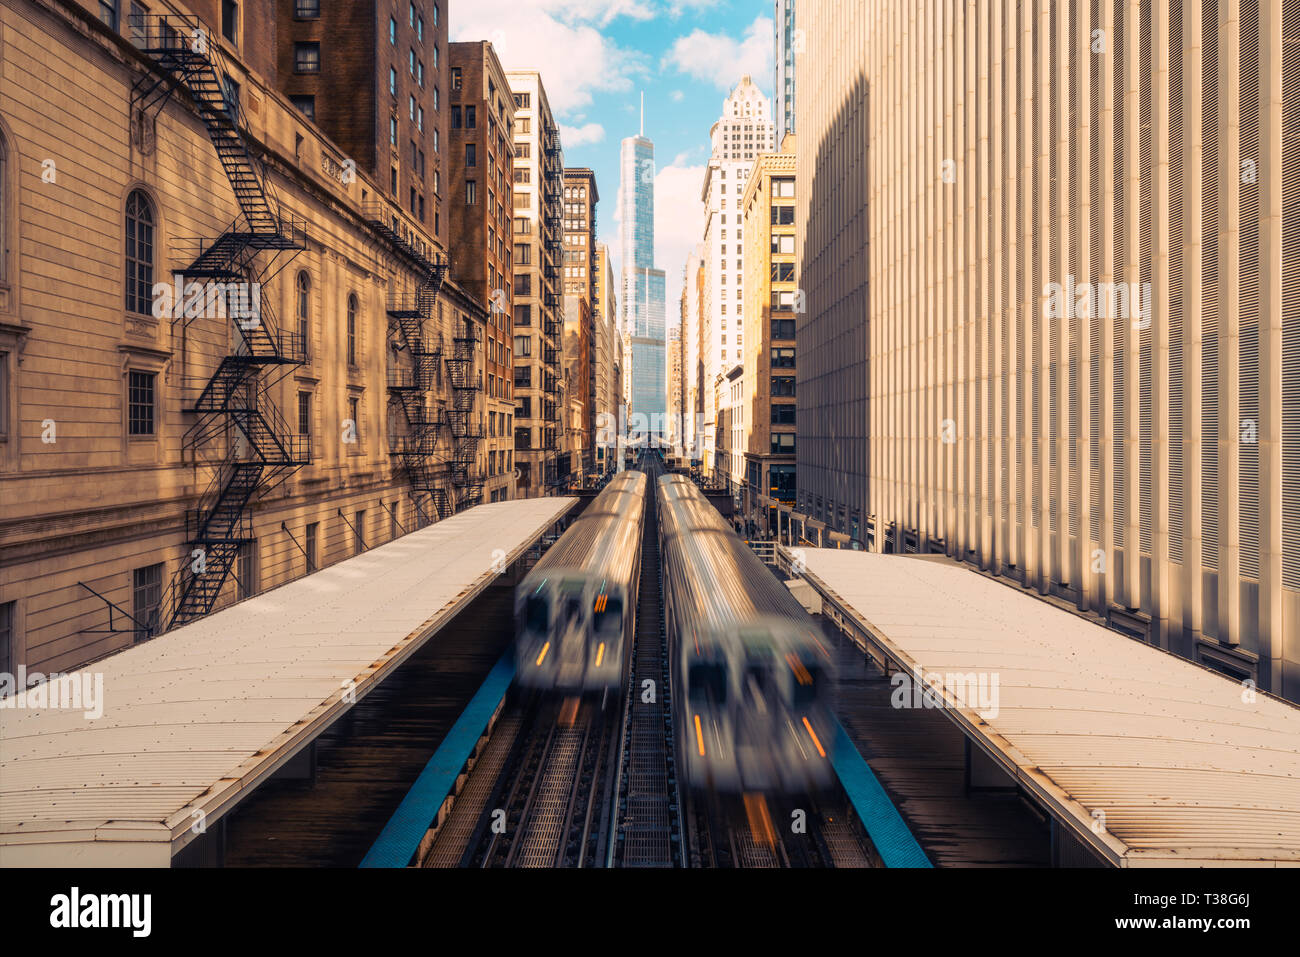 Trains arriving railway station between buildings in downtown Chicago, Illinois. Public transportation, USA landmark, or American city life concept Stock Photo